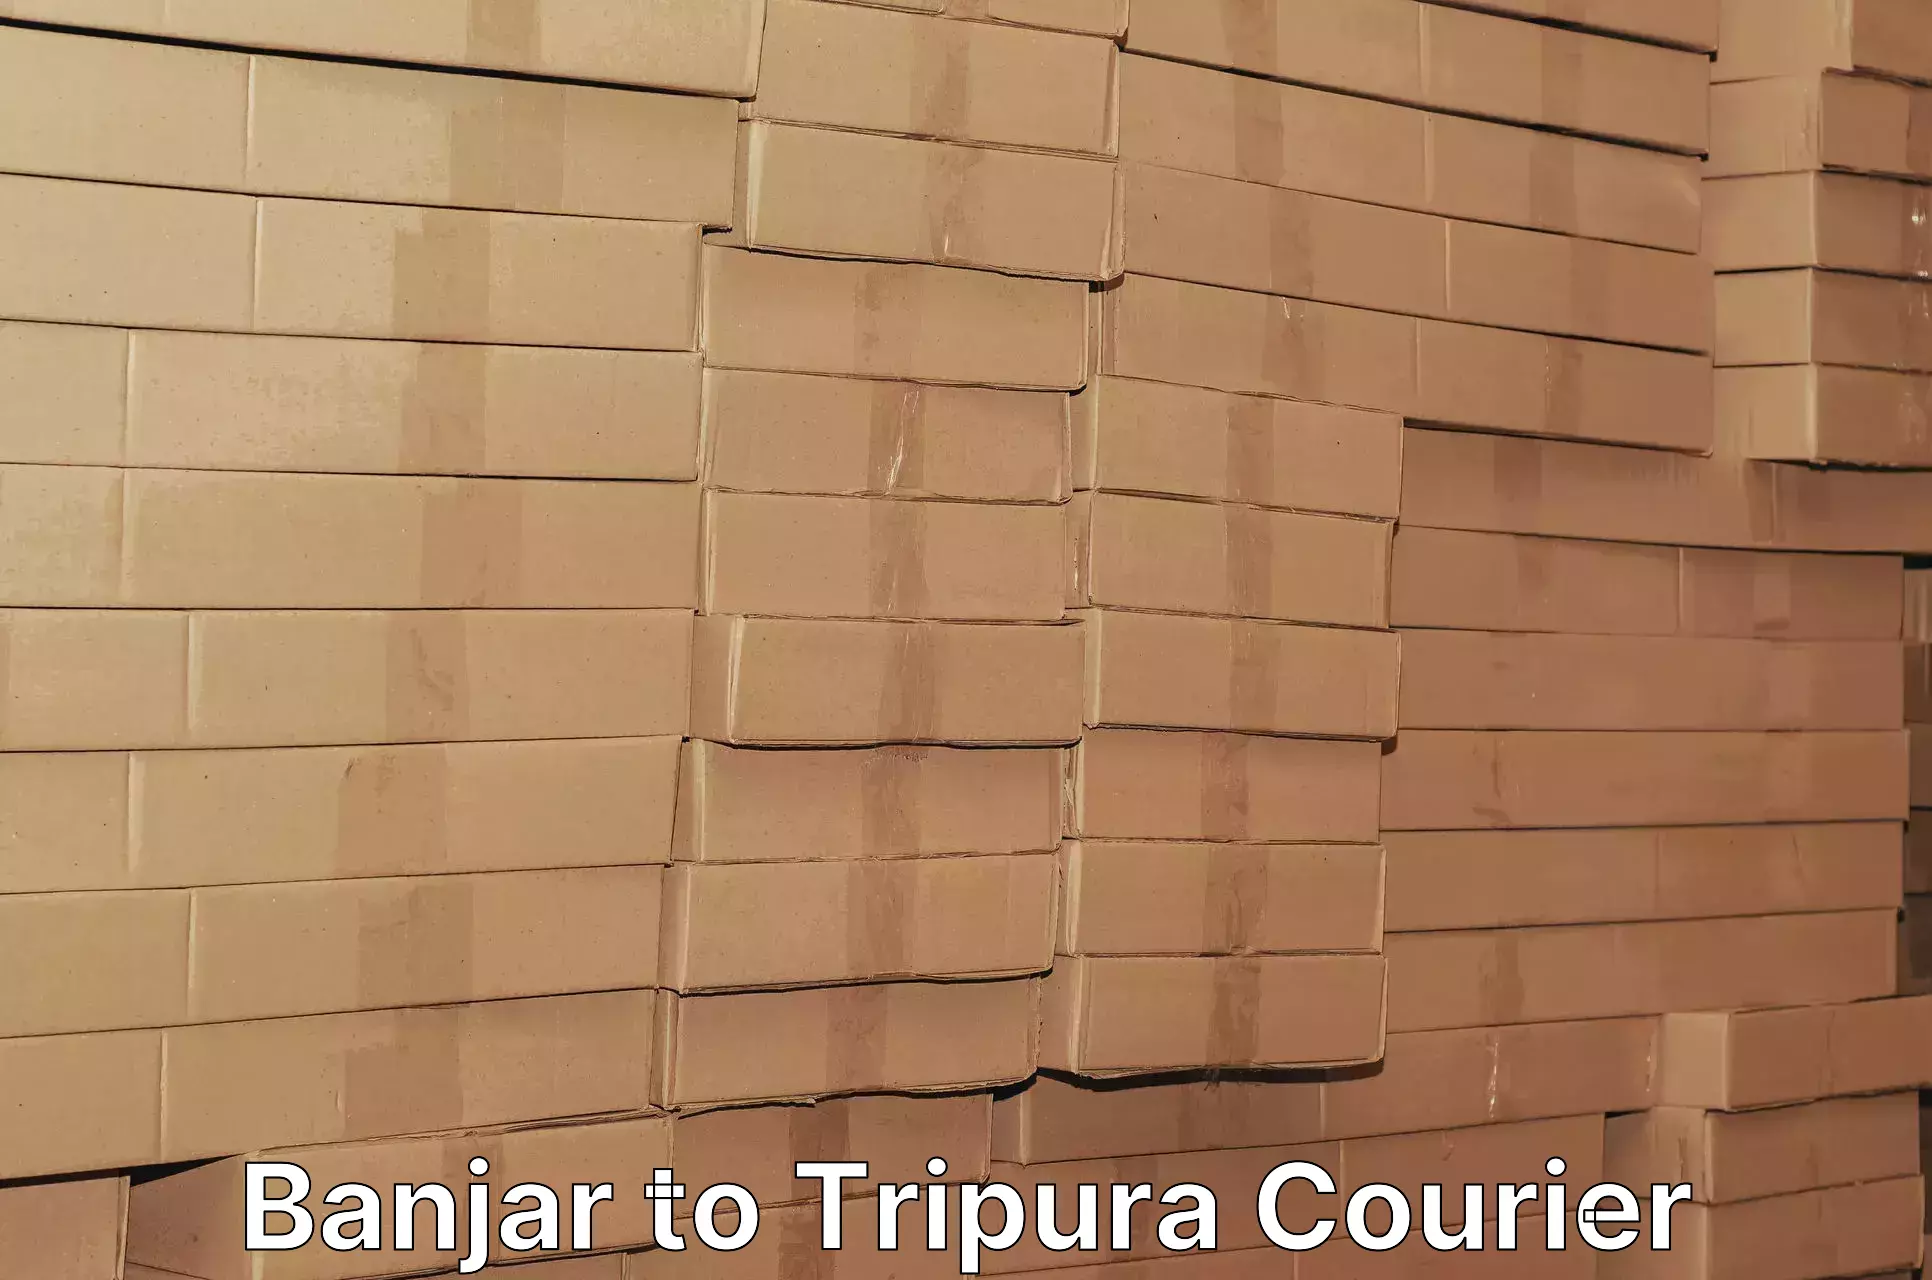 Efficient shipping operations in Banjar to Tripura